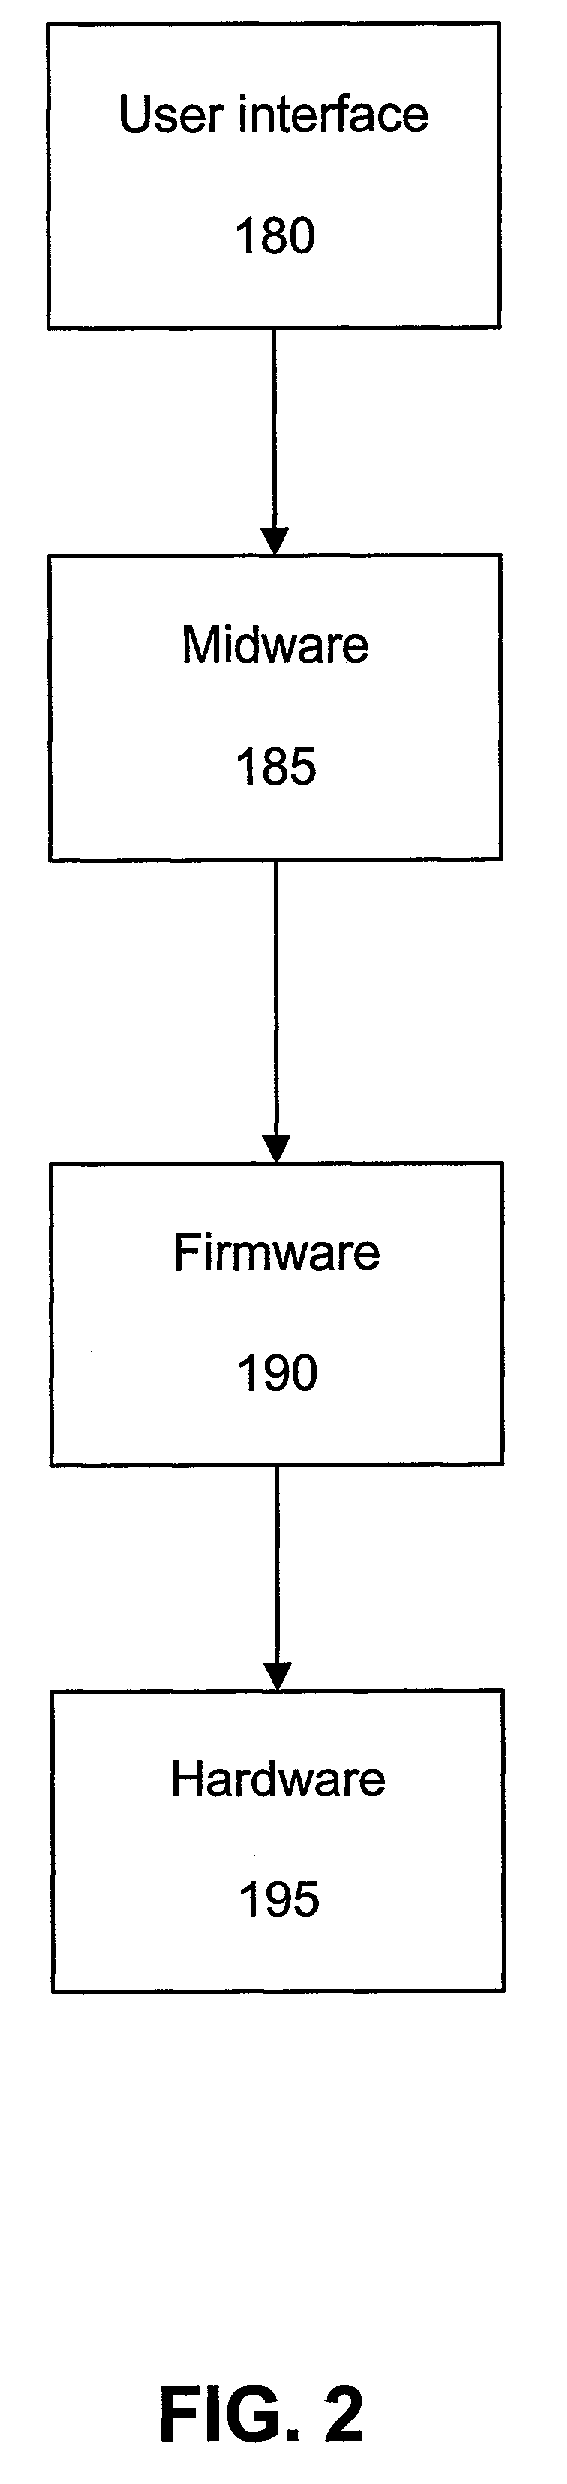 Fibre channel zoning by device name in hardware